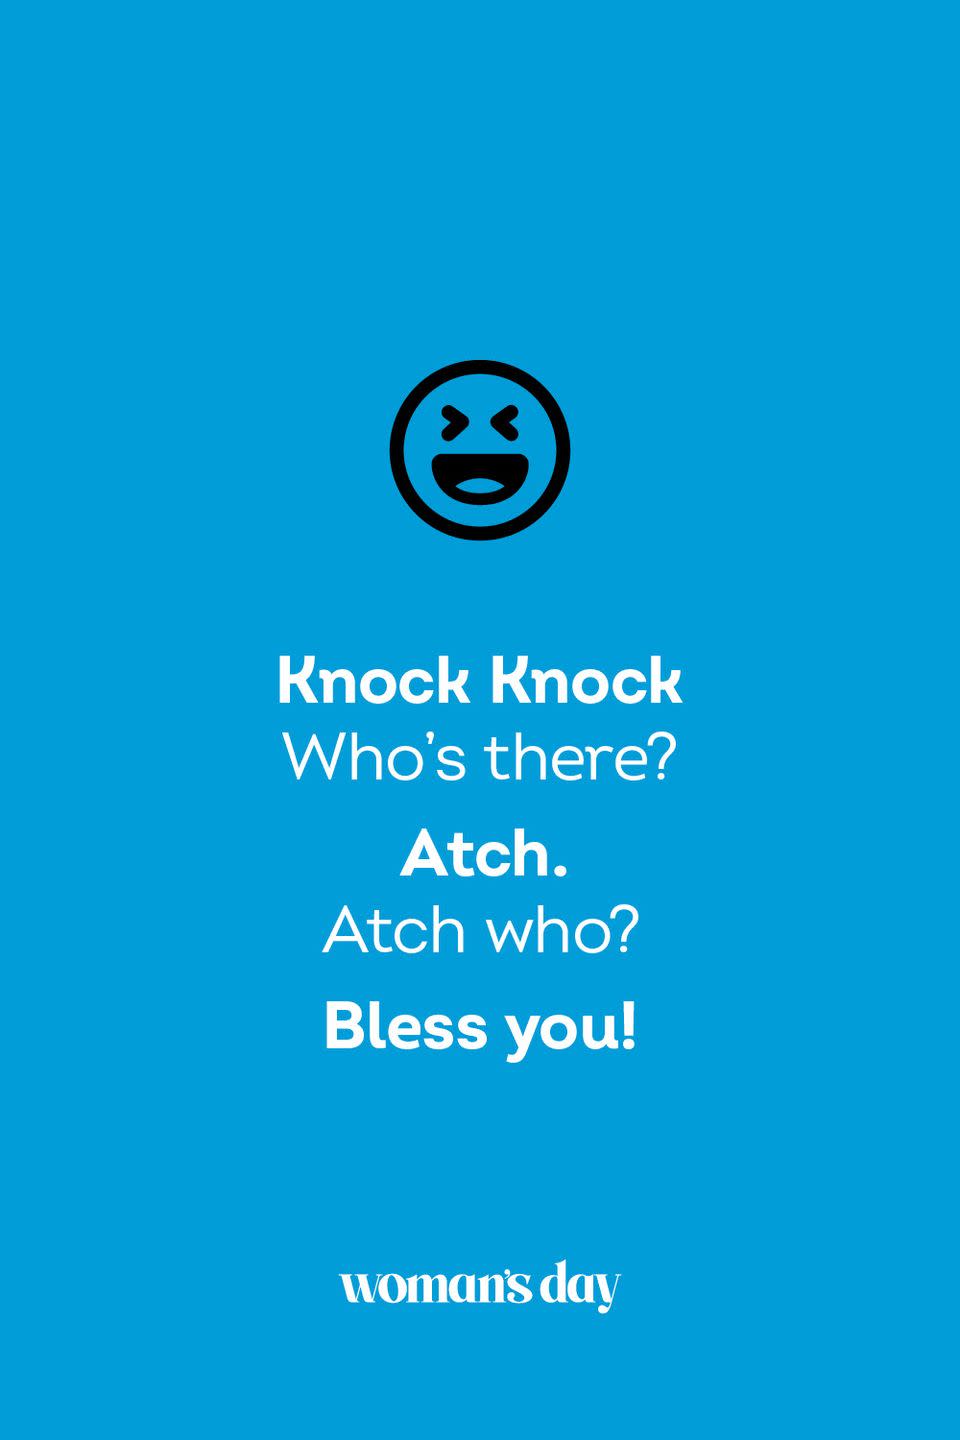 <p><strong>Knock Knock</strong></p><p><em>Who’s there? </em></p><p><strong>Atch</strong>.</p><p><em>Atch who?</em></p><p><strong>Bless you!</strong></p>